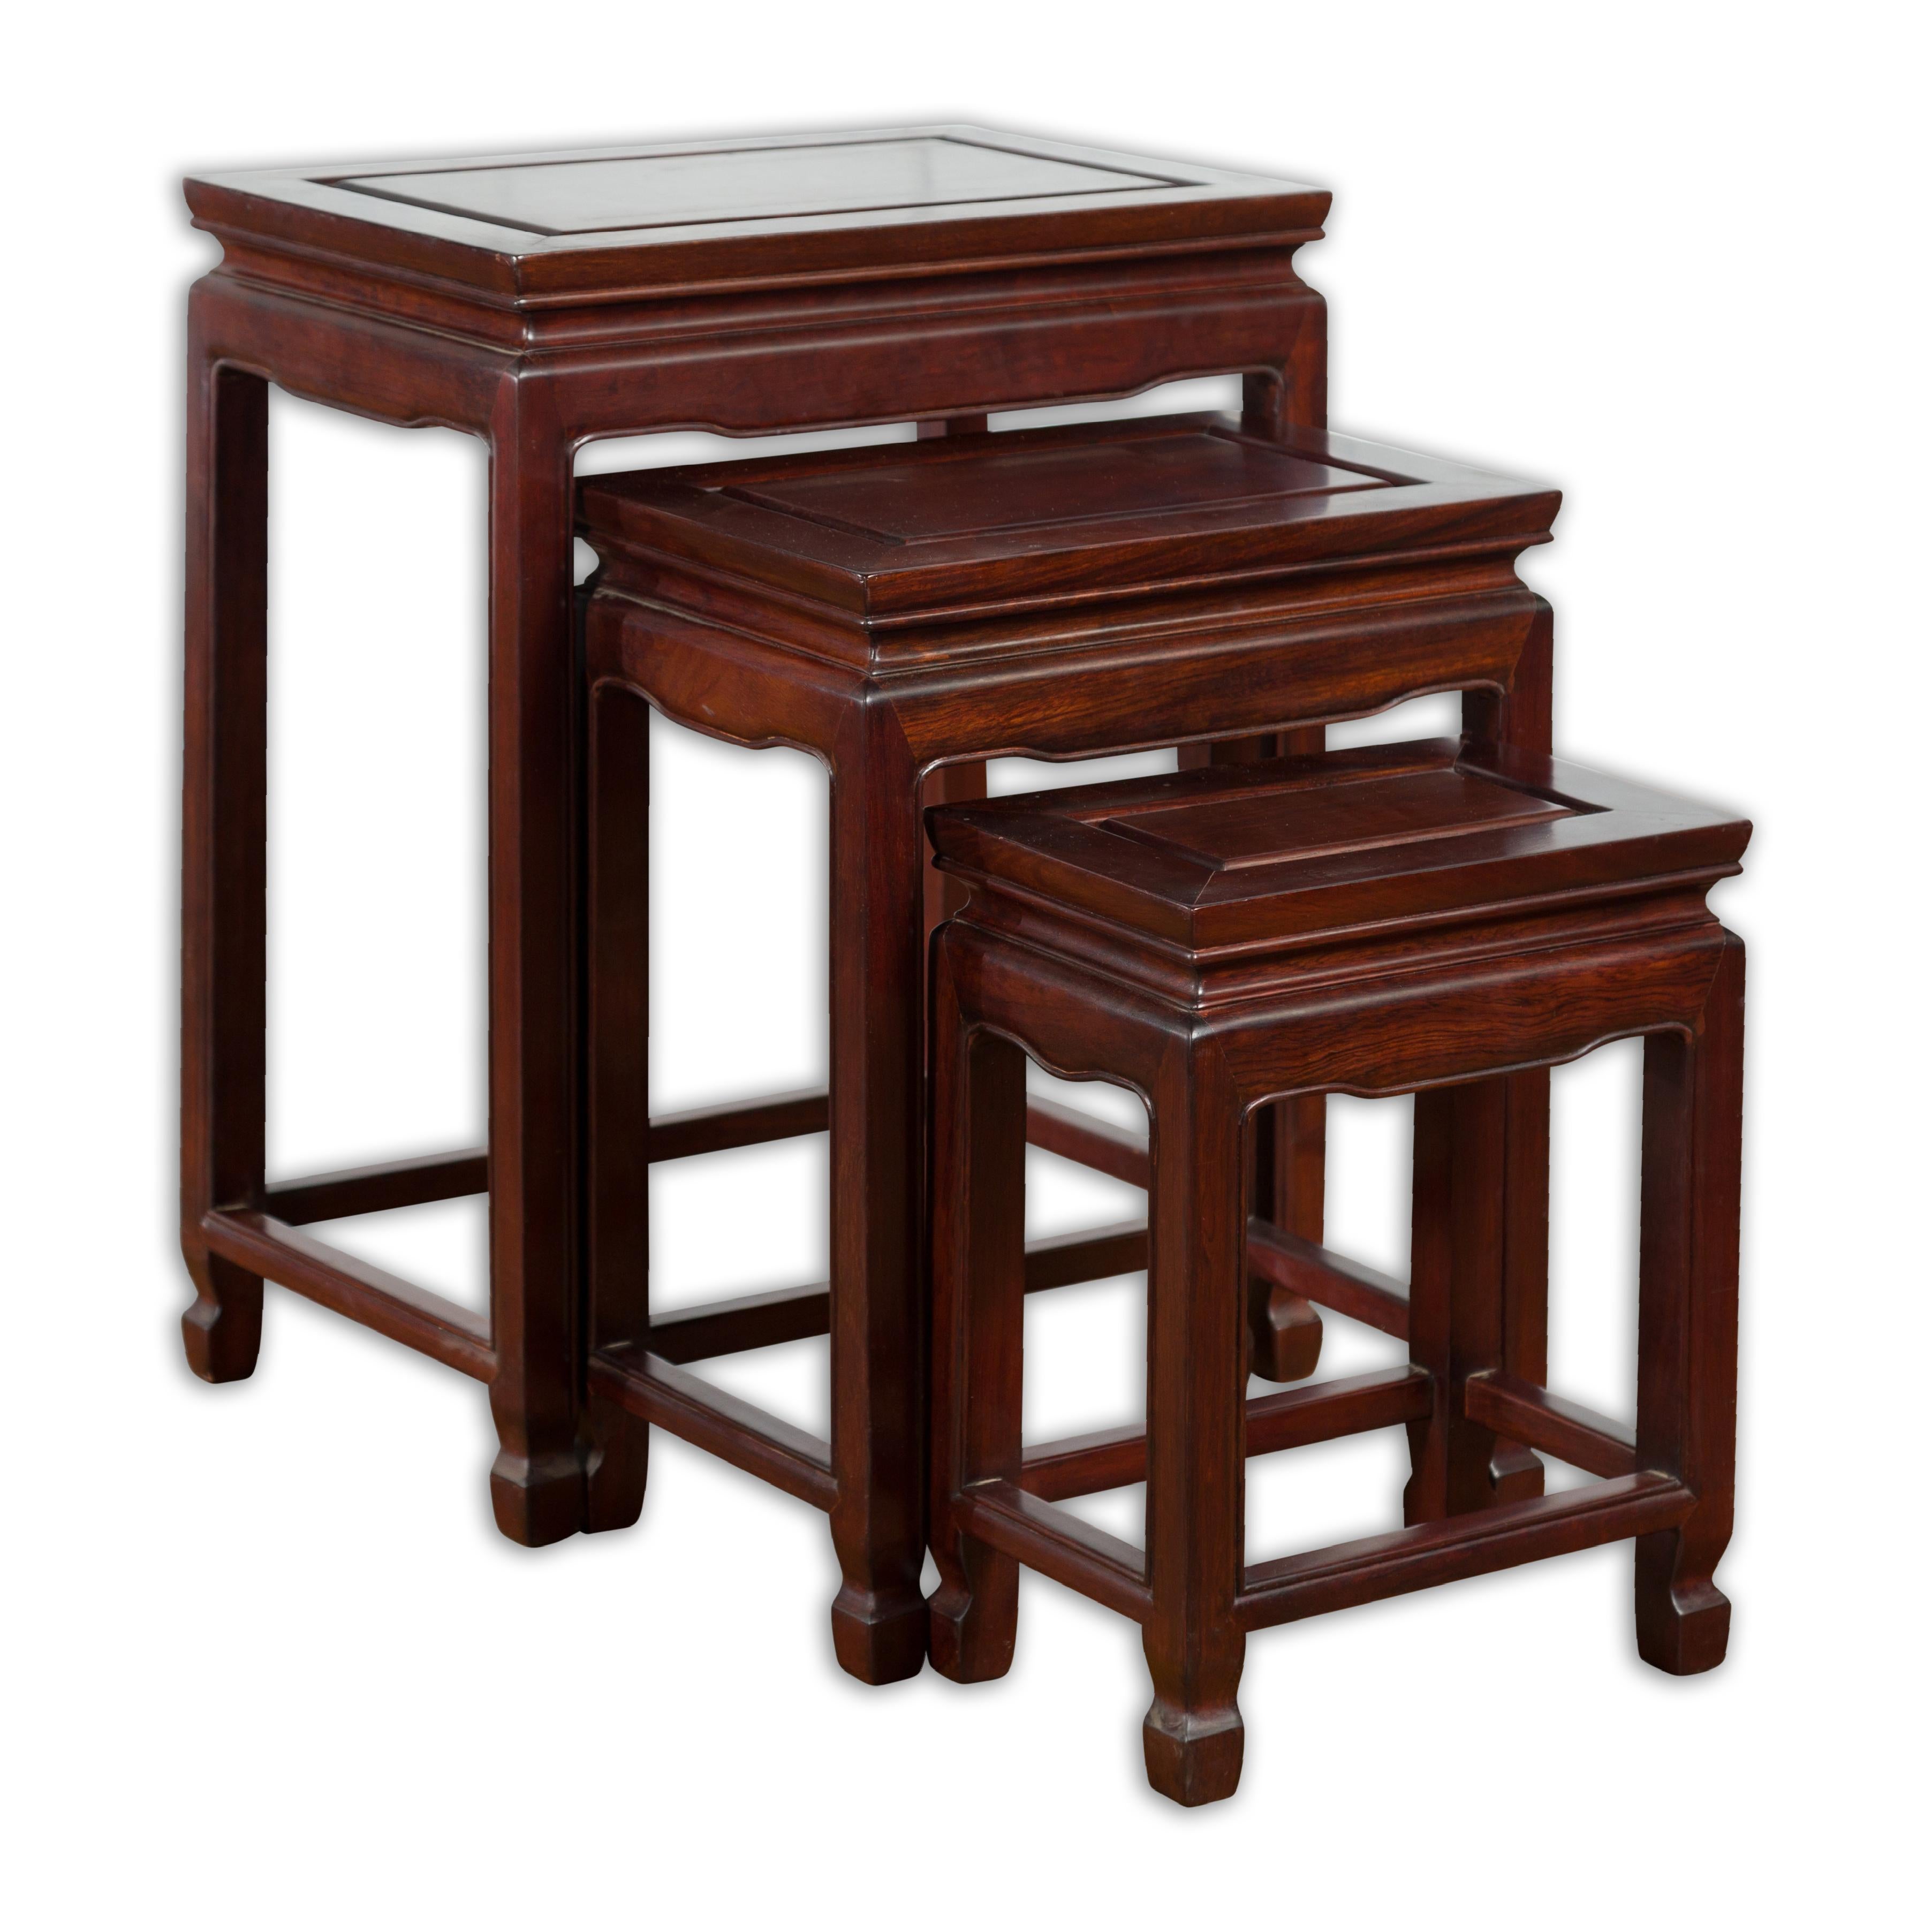 A set of three vintage Chinese rosewood nesting side tables from the mid-20th century with dark reddish brown patina, curving waisted apron, straight legs, horse hoof feet and side stretchers. Created in China during the midcentury period, each of